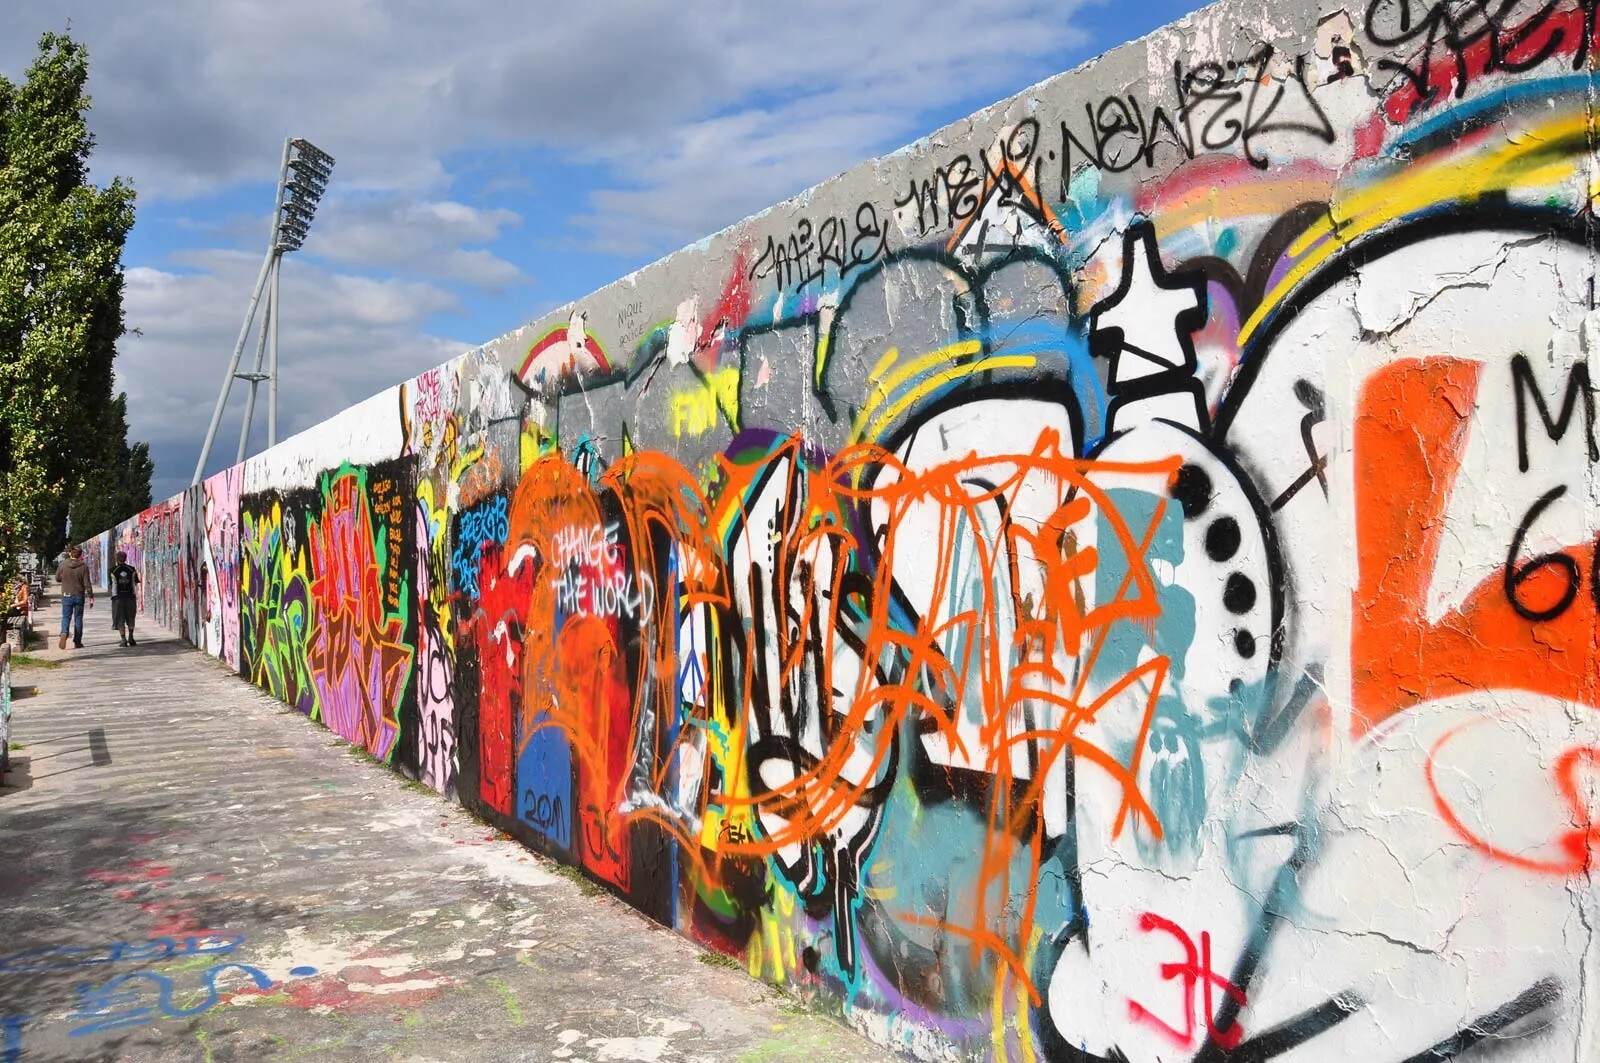 21 Interesting Facts About Graffiti - The Fact Site